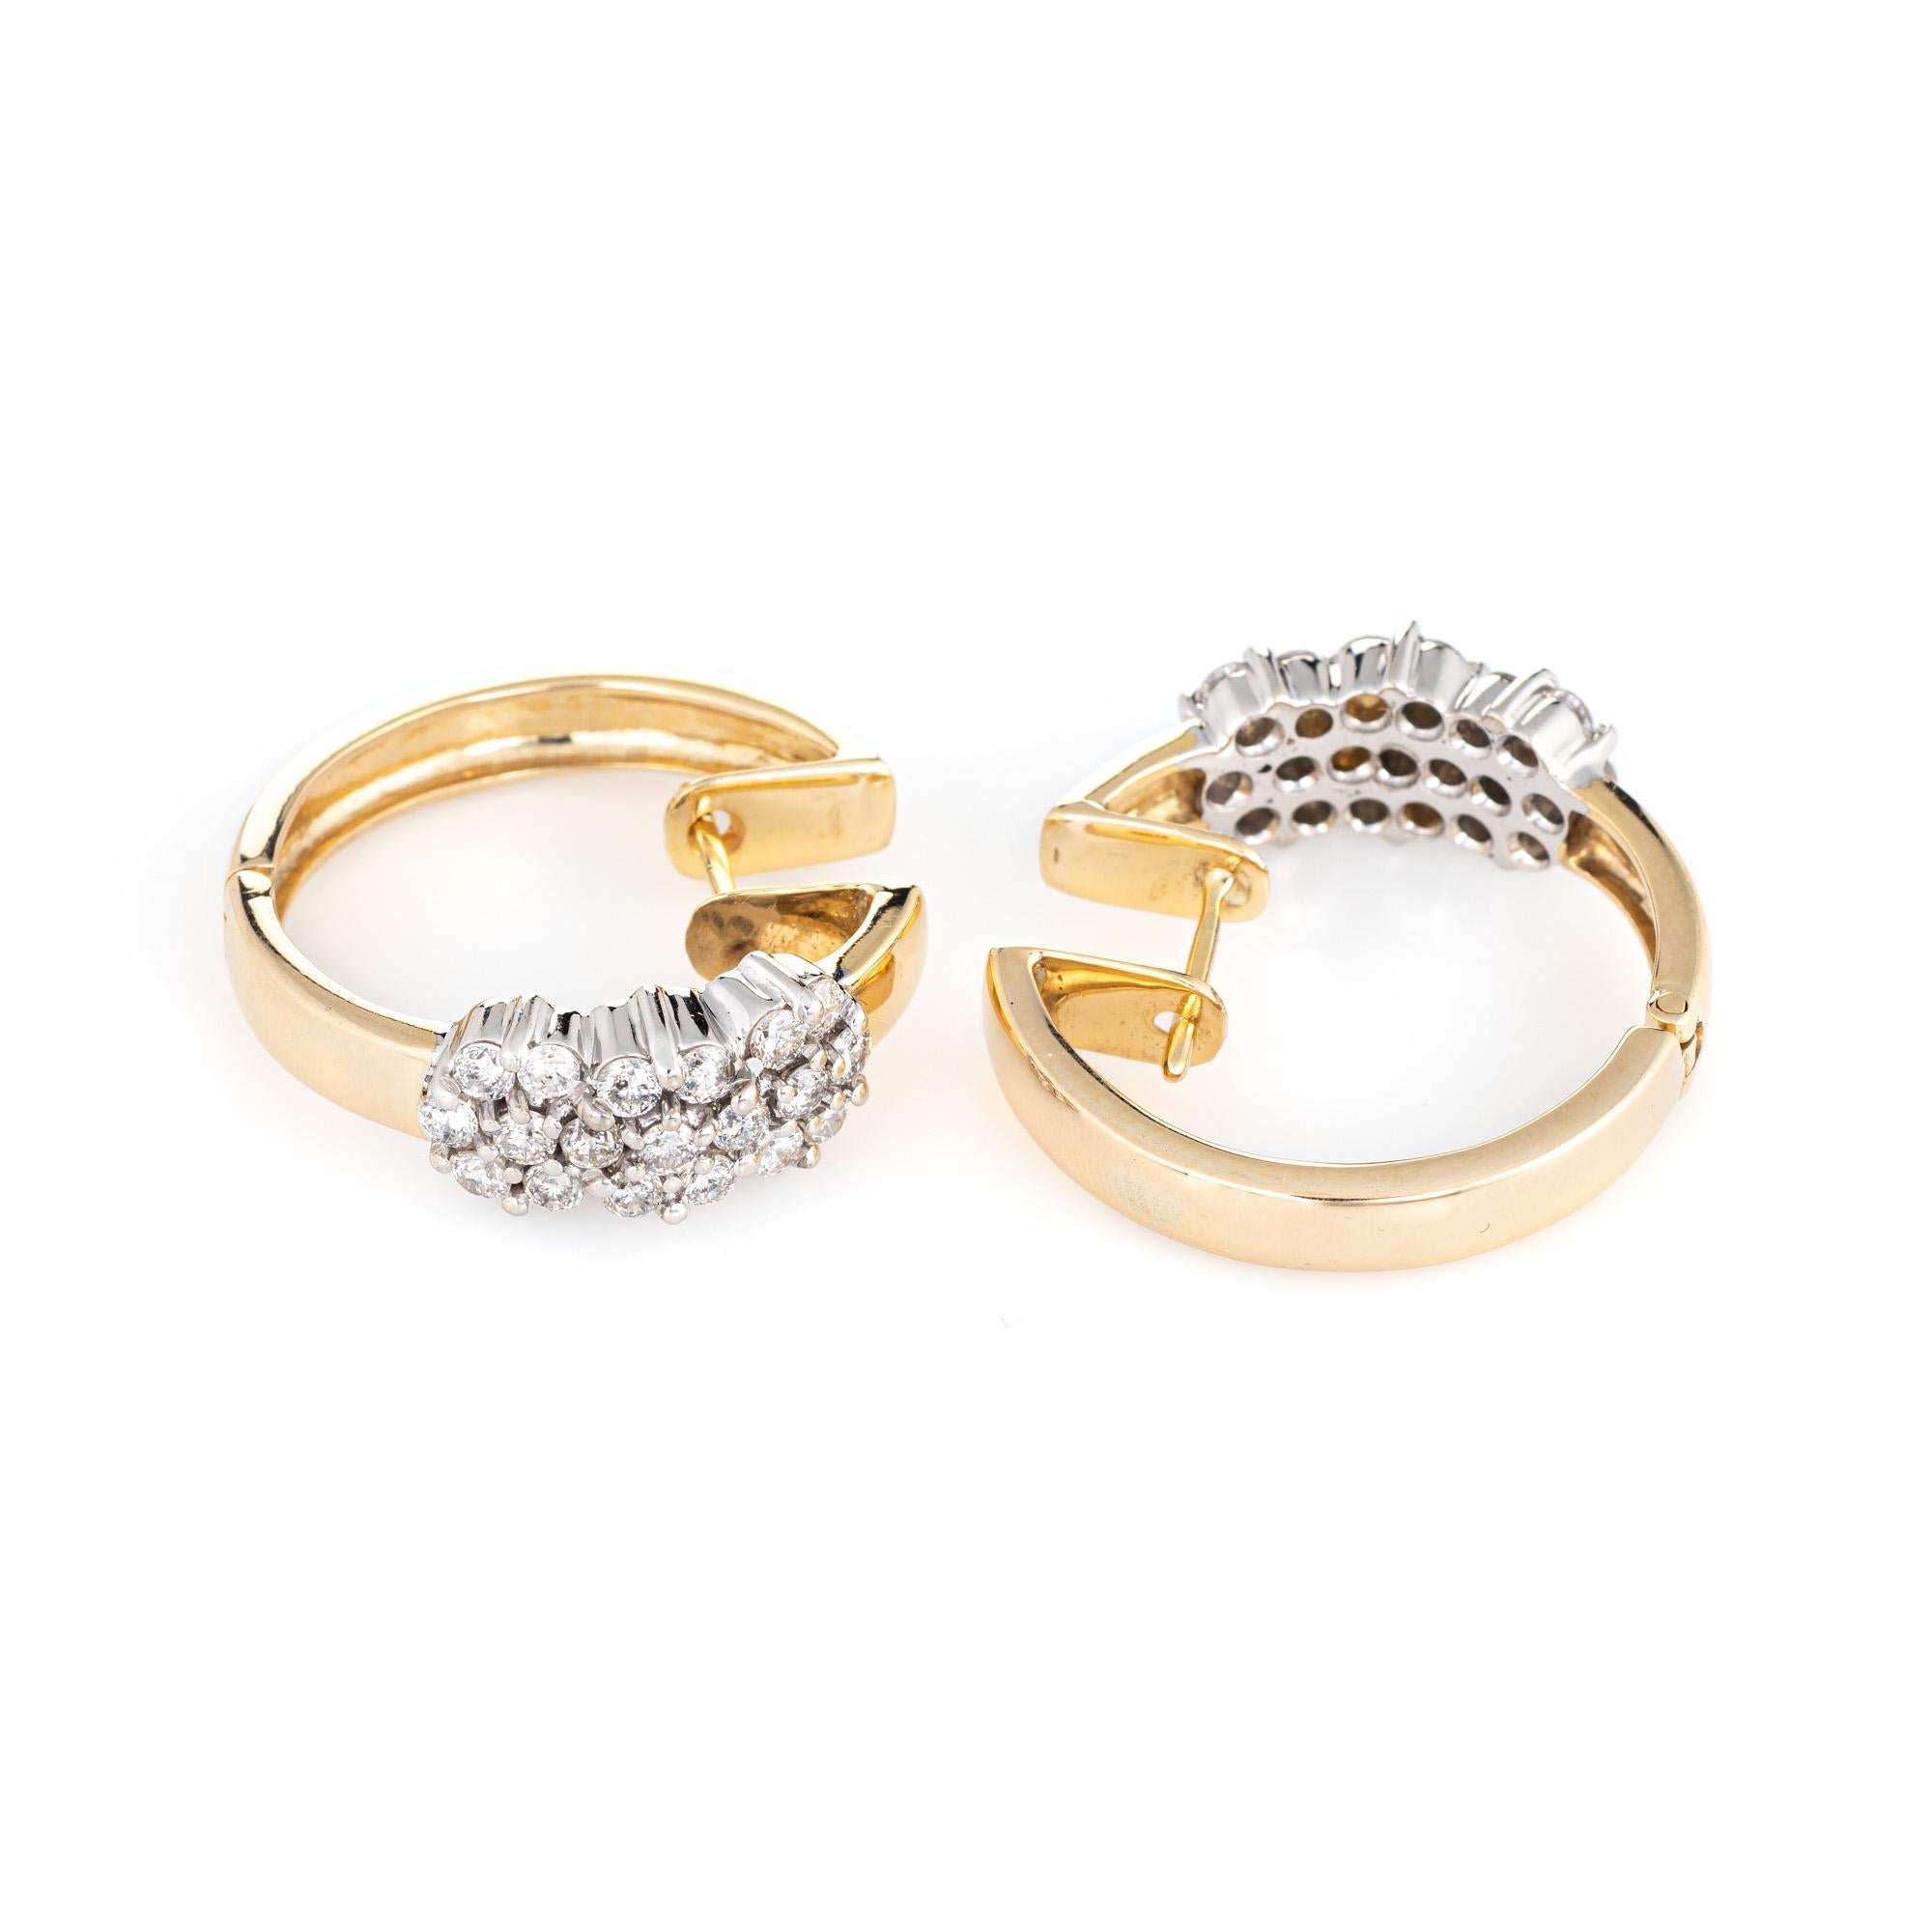 Stylish vintage diamond hoop earrings crafted in 14k yellow gold. 

Round brilliant cut diamonds total an estimated 1.52 carats (estimated at H-I color and SI2-I1 clarity).  

The charming earrings are set with a cluster of diamonds in floral style